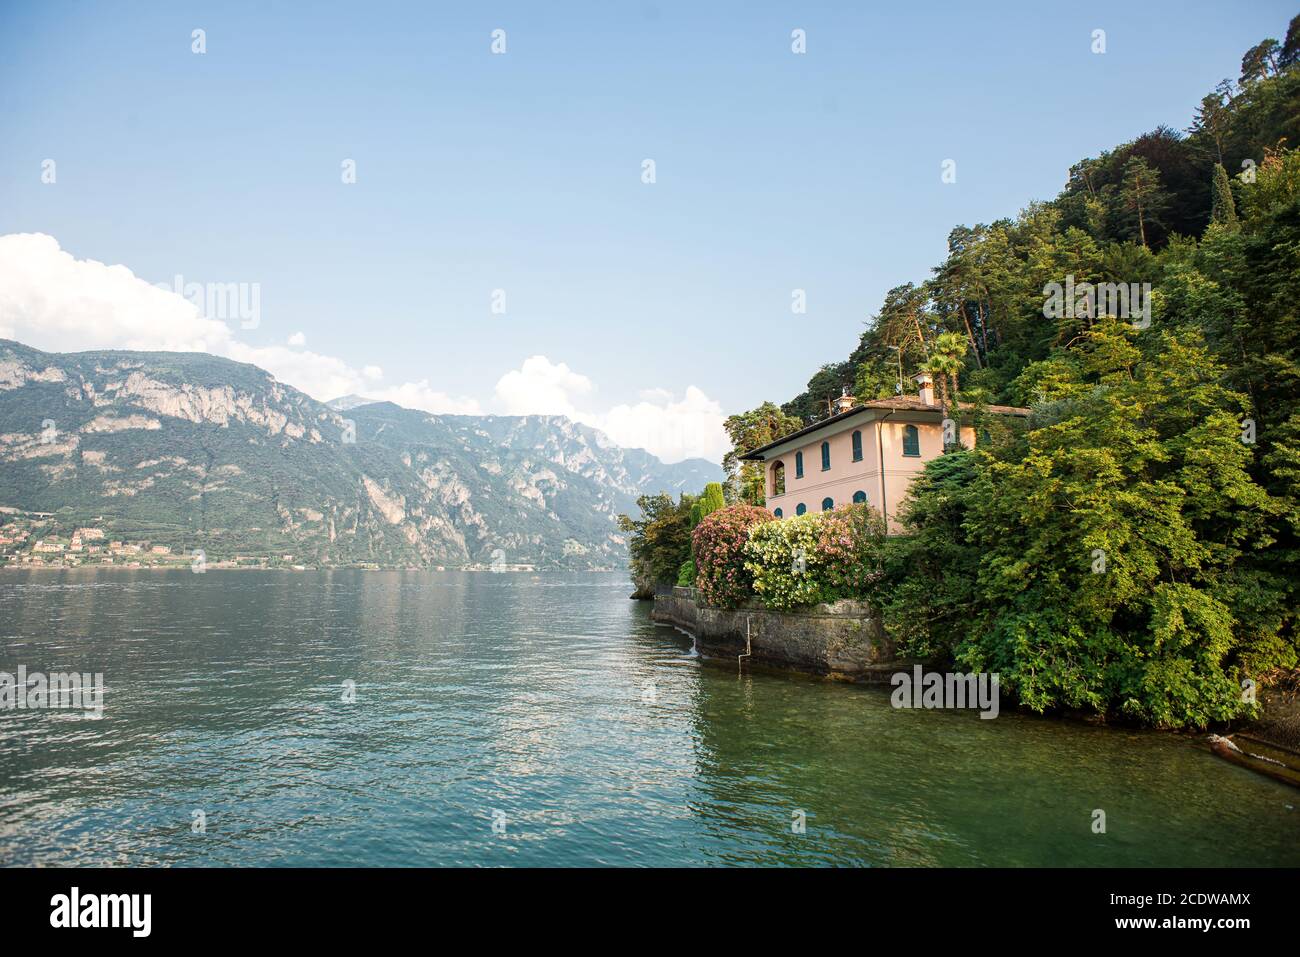 Bellagio. Lake Como. Italy - July 19, 2019: Stunning Landscape with Alps and Lake Como. Old Villa on Shore Among Trees. Stock Photo